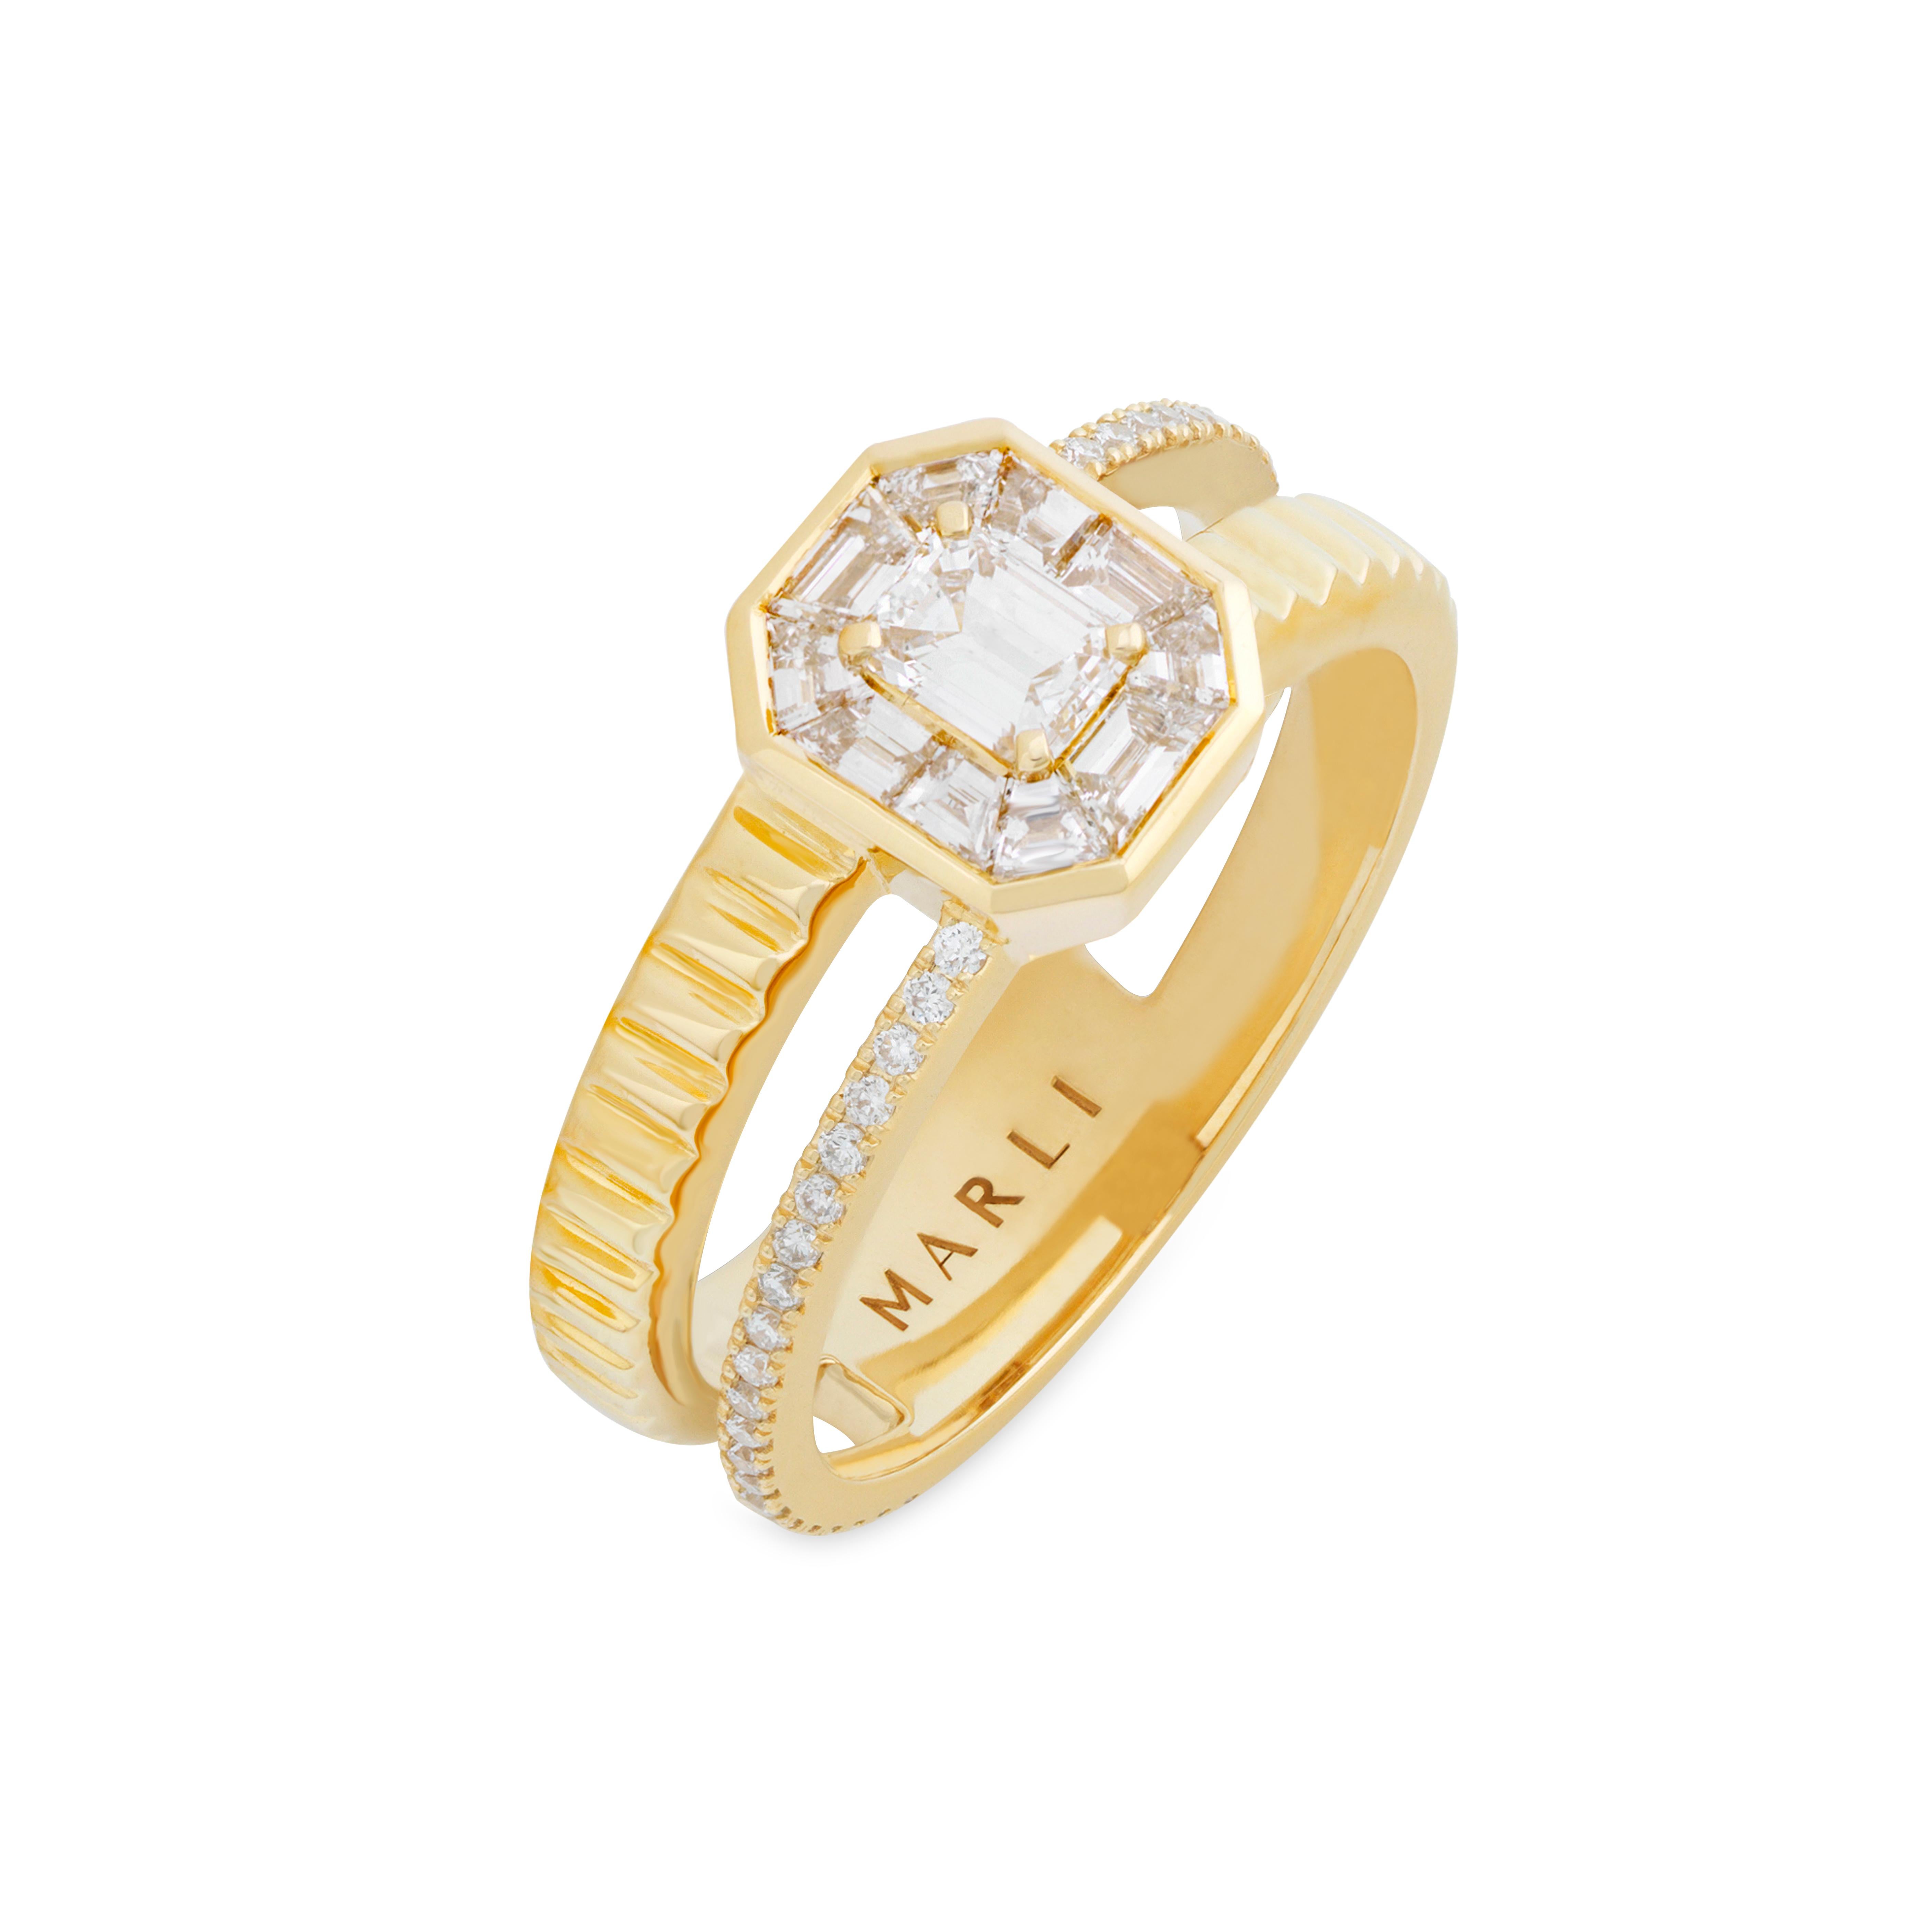 Suggesting the opulence and geometry of the Art Deco era, the Deco Rectangle Ring adds a contemporary touch of minimalism. Two parallel lanes of ridged 18K white, rose, or yellow gold converge and connect with an emerald cut diamond center that is